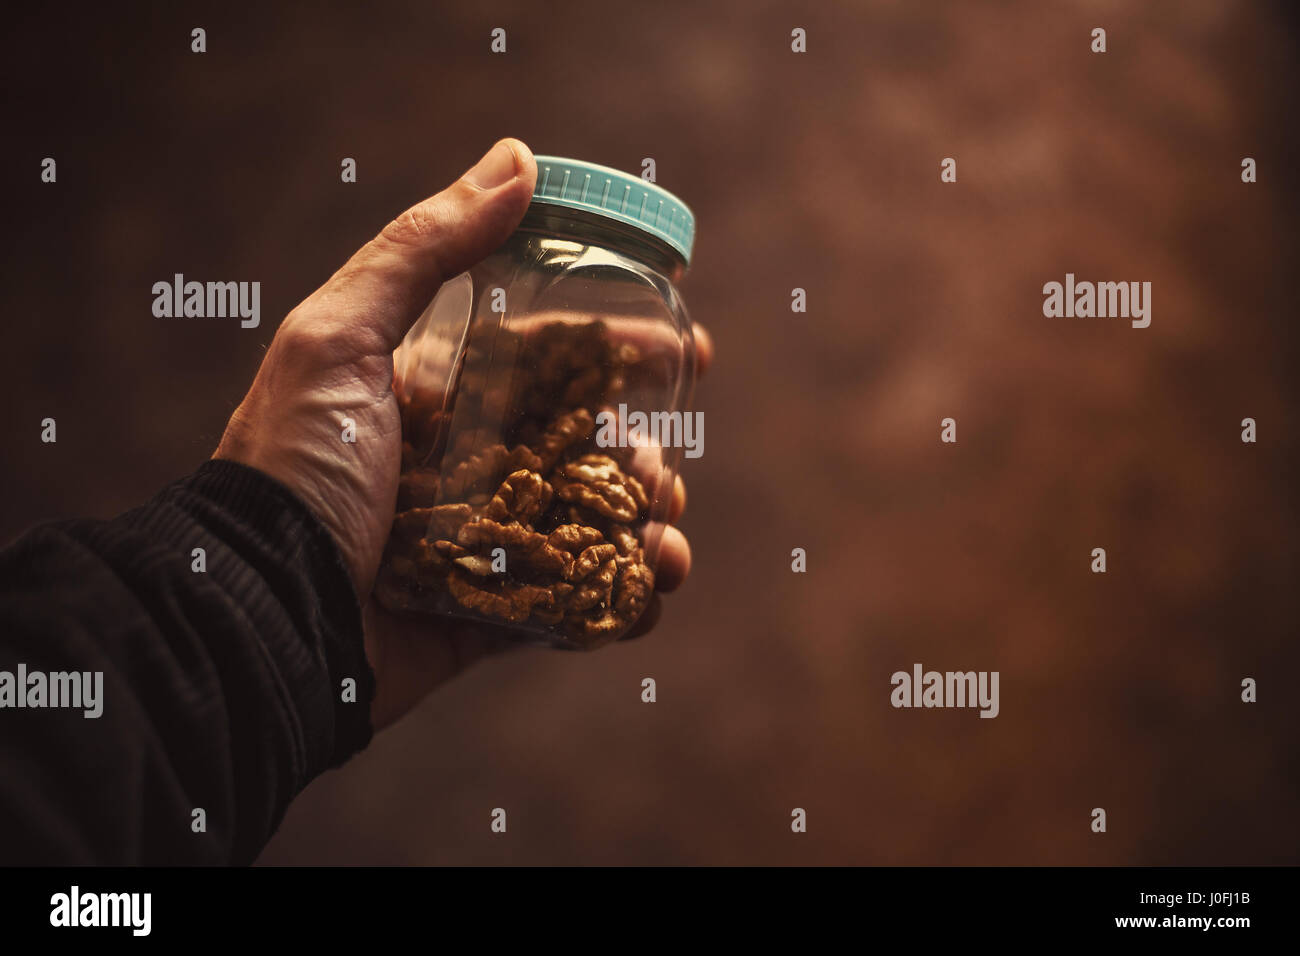 Closeup view on jar with walnuts, hand held by a man. Stock Photo